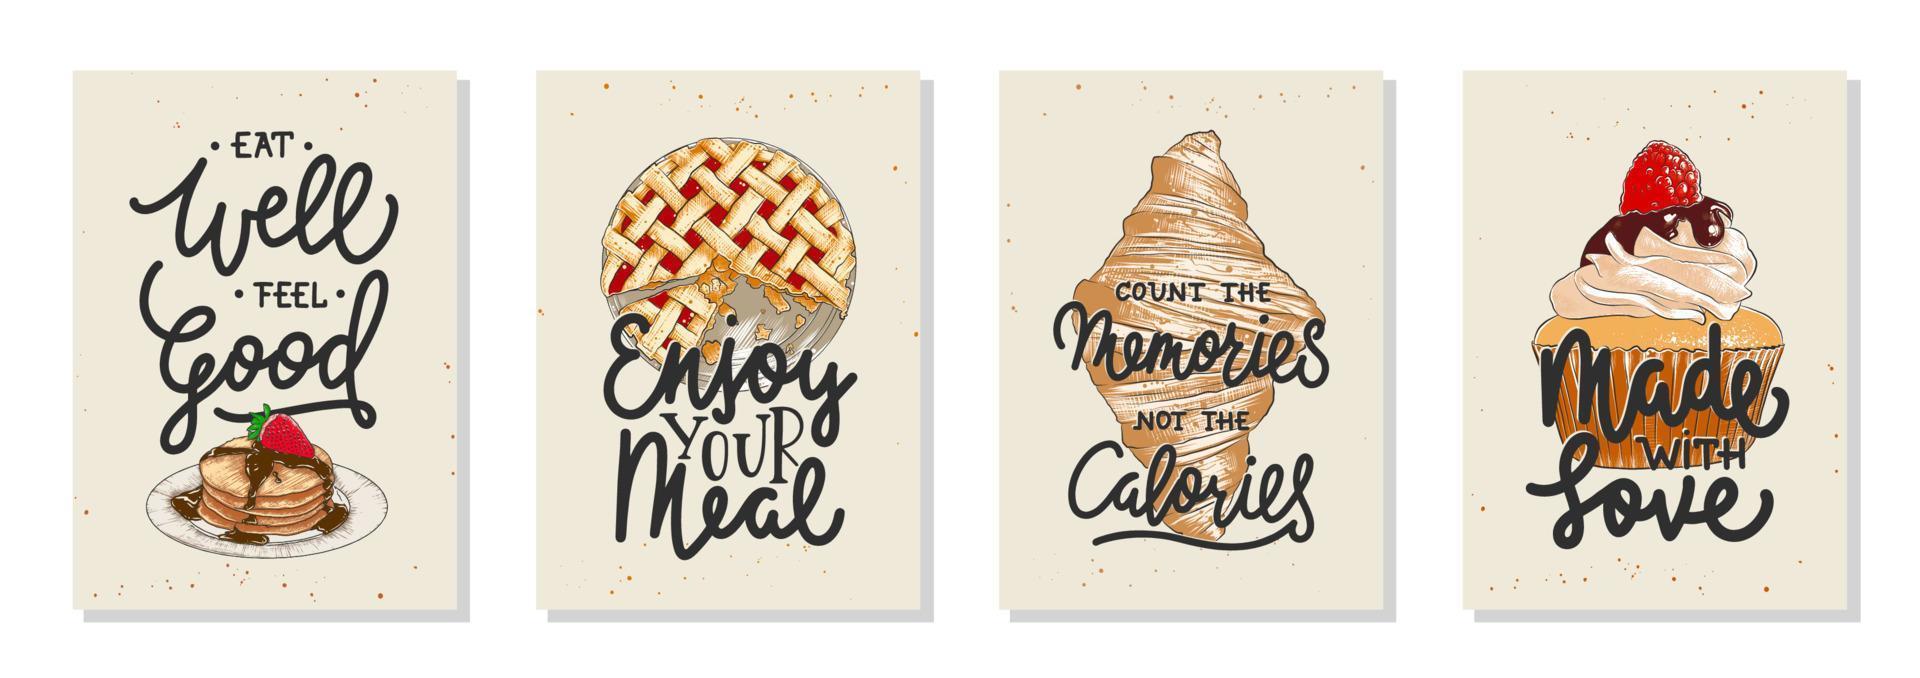 Set of 4 vector bakery posters with hand drawn unique funny lettering design element for kitchen decoration, prints and advertising cafe wall art. Engraved sketch of cupcake, pancakes, pie, croissant.